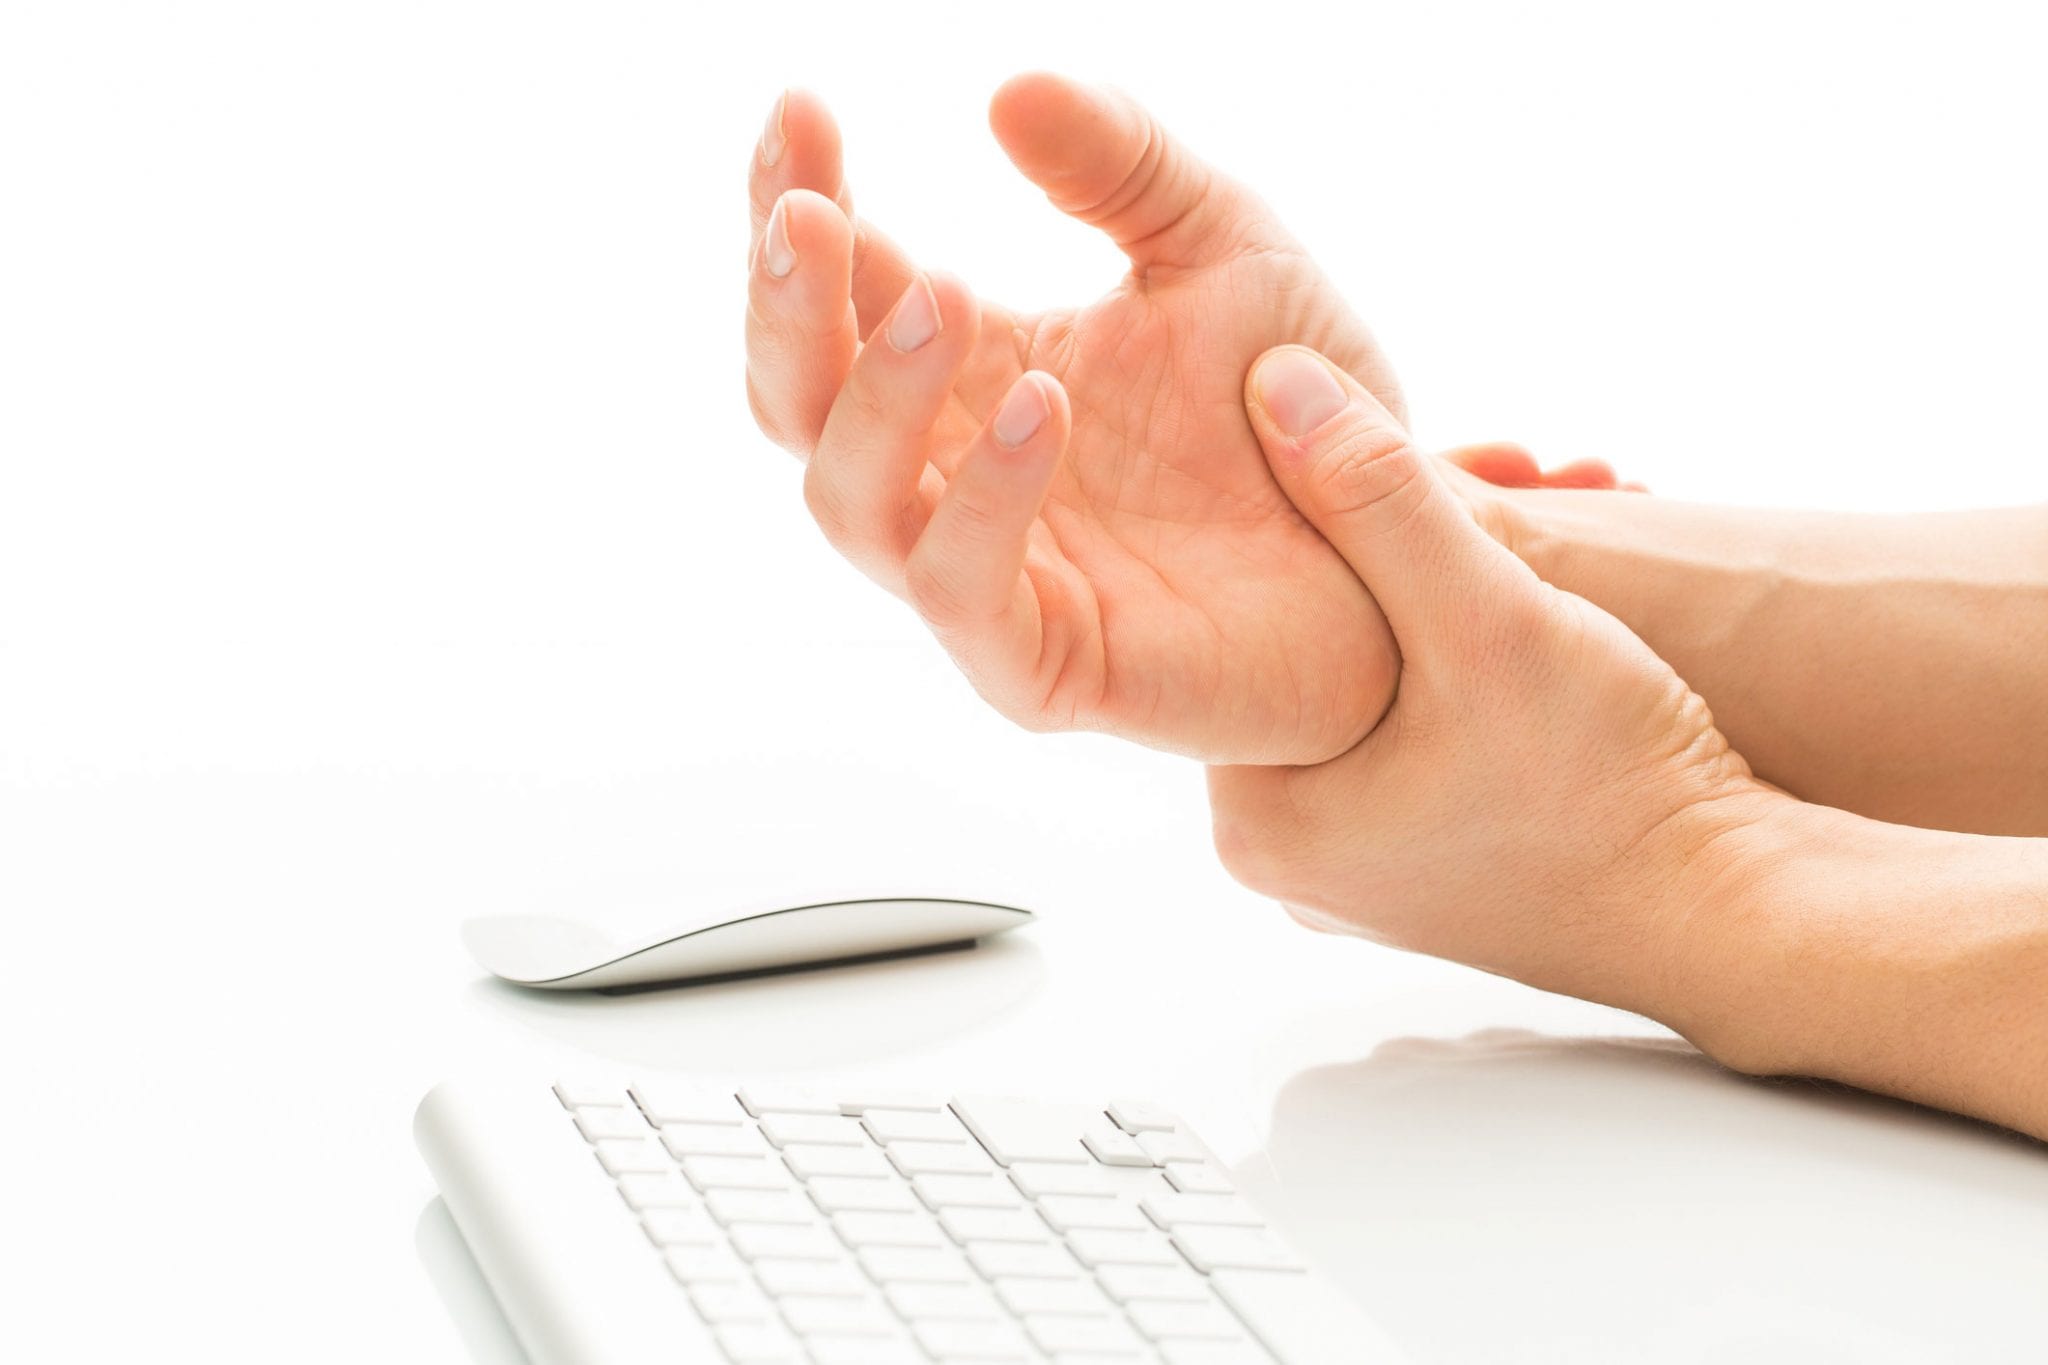 The Top 7 Symptoms of Carpal Tunnel Syndrome